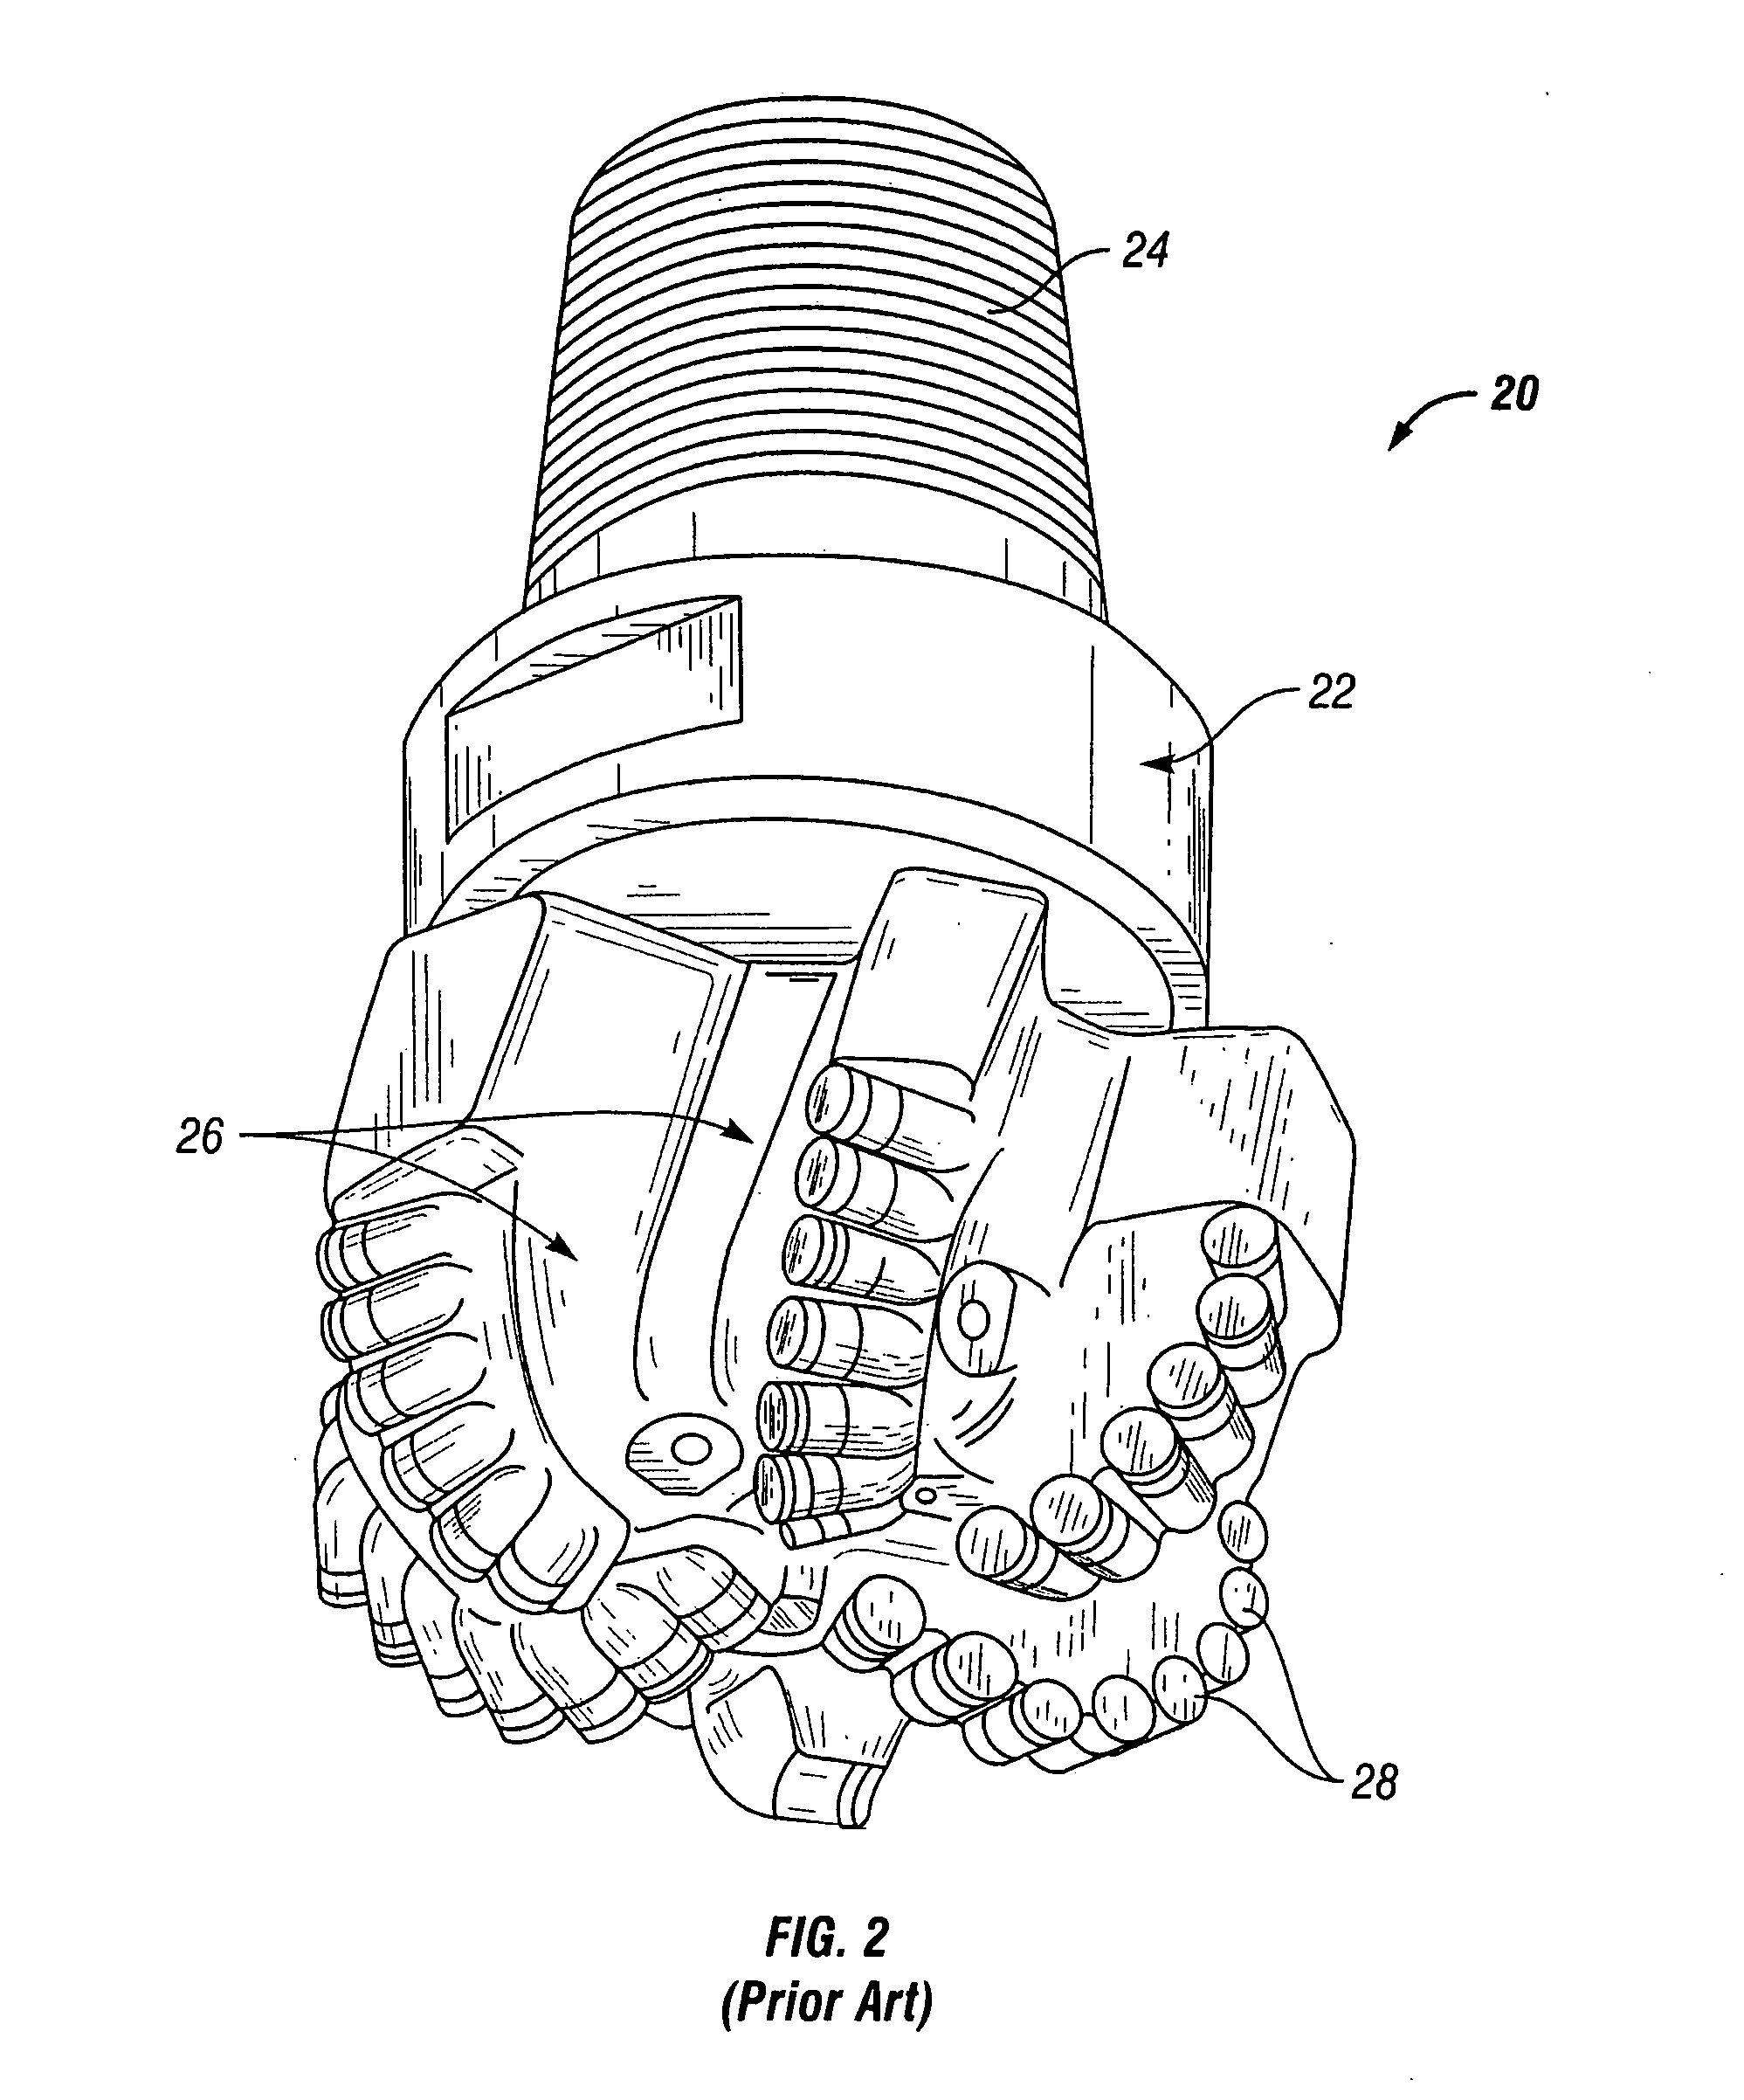 Methods for modeling wear of fixed cutter bits and for designing and optimizing fixed cutter bits